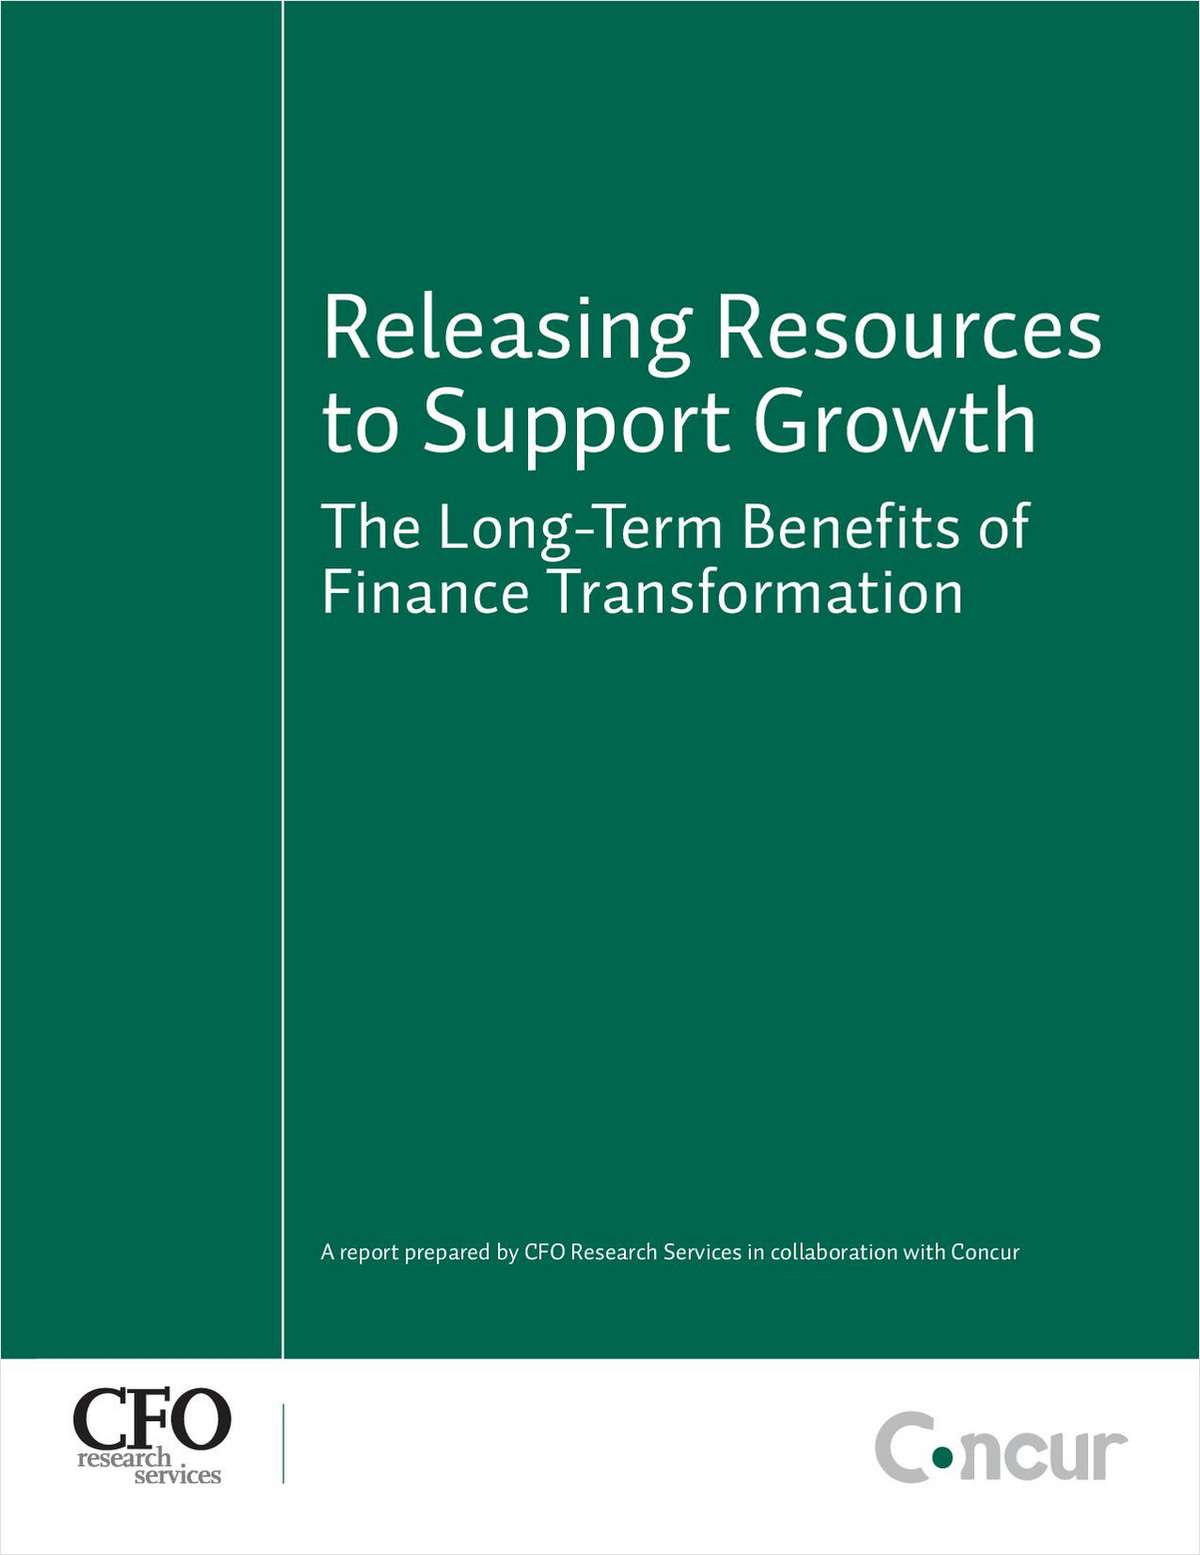 Releasing Resources to Support Growth - The Long-Term Benefits of Finance Transformation